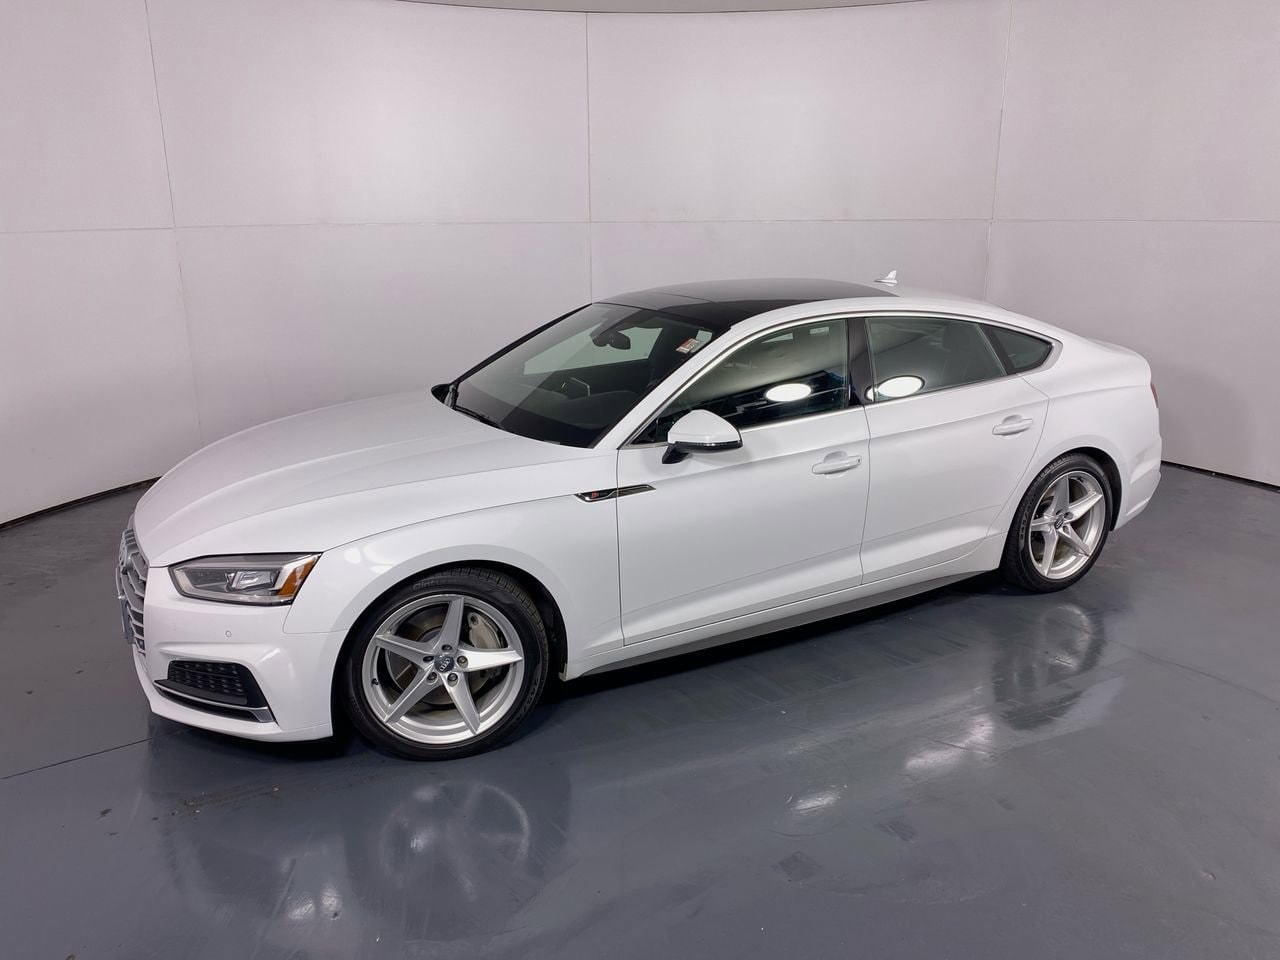 Used 2018 Audi A5 Sportback Premium Plus with VIN WAUENCF58JA030982 for sale in Hoffman Estates, IL